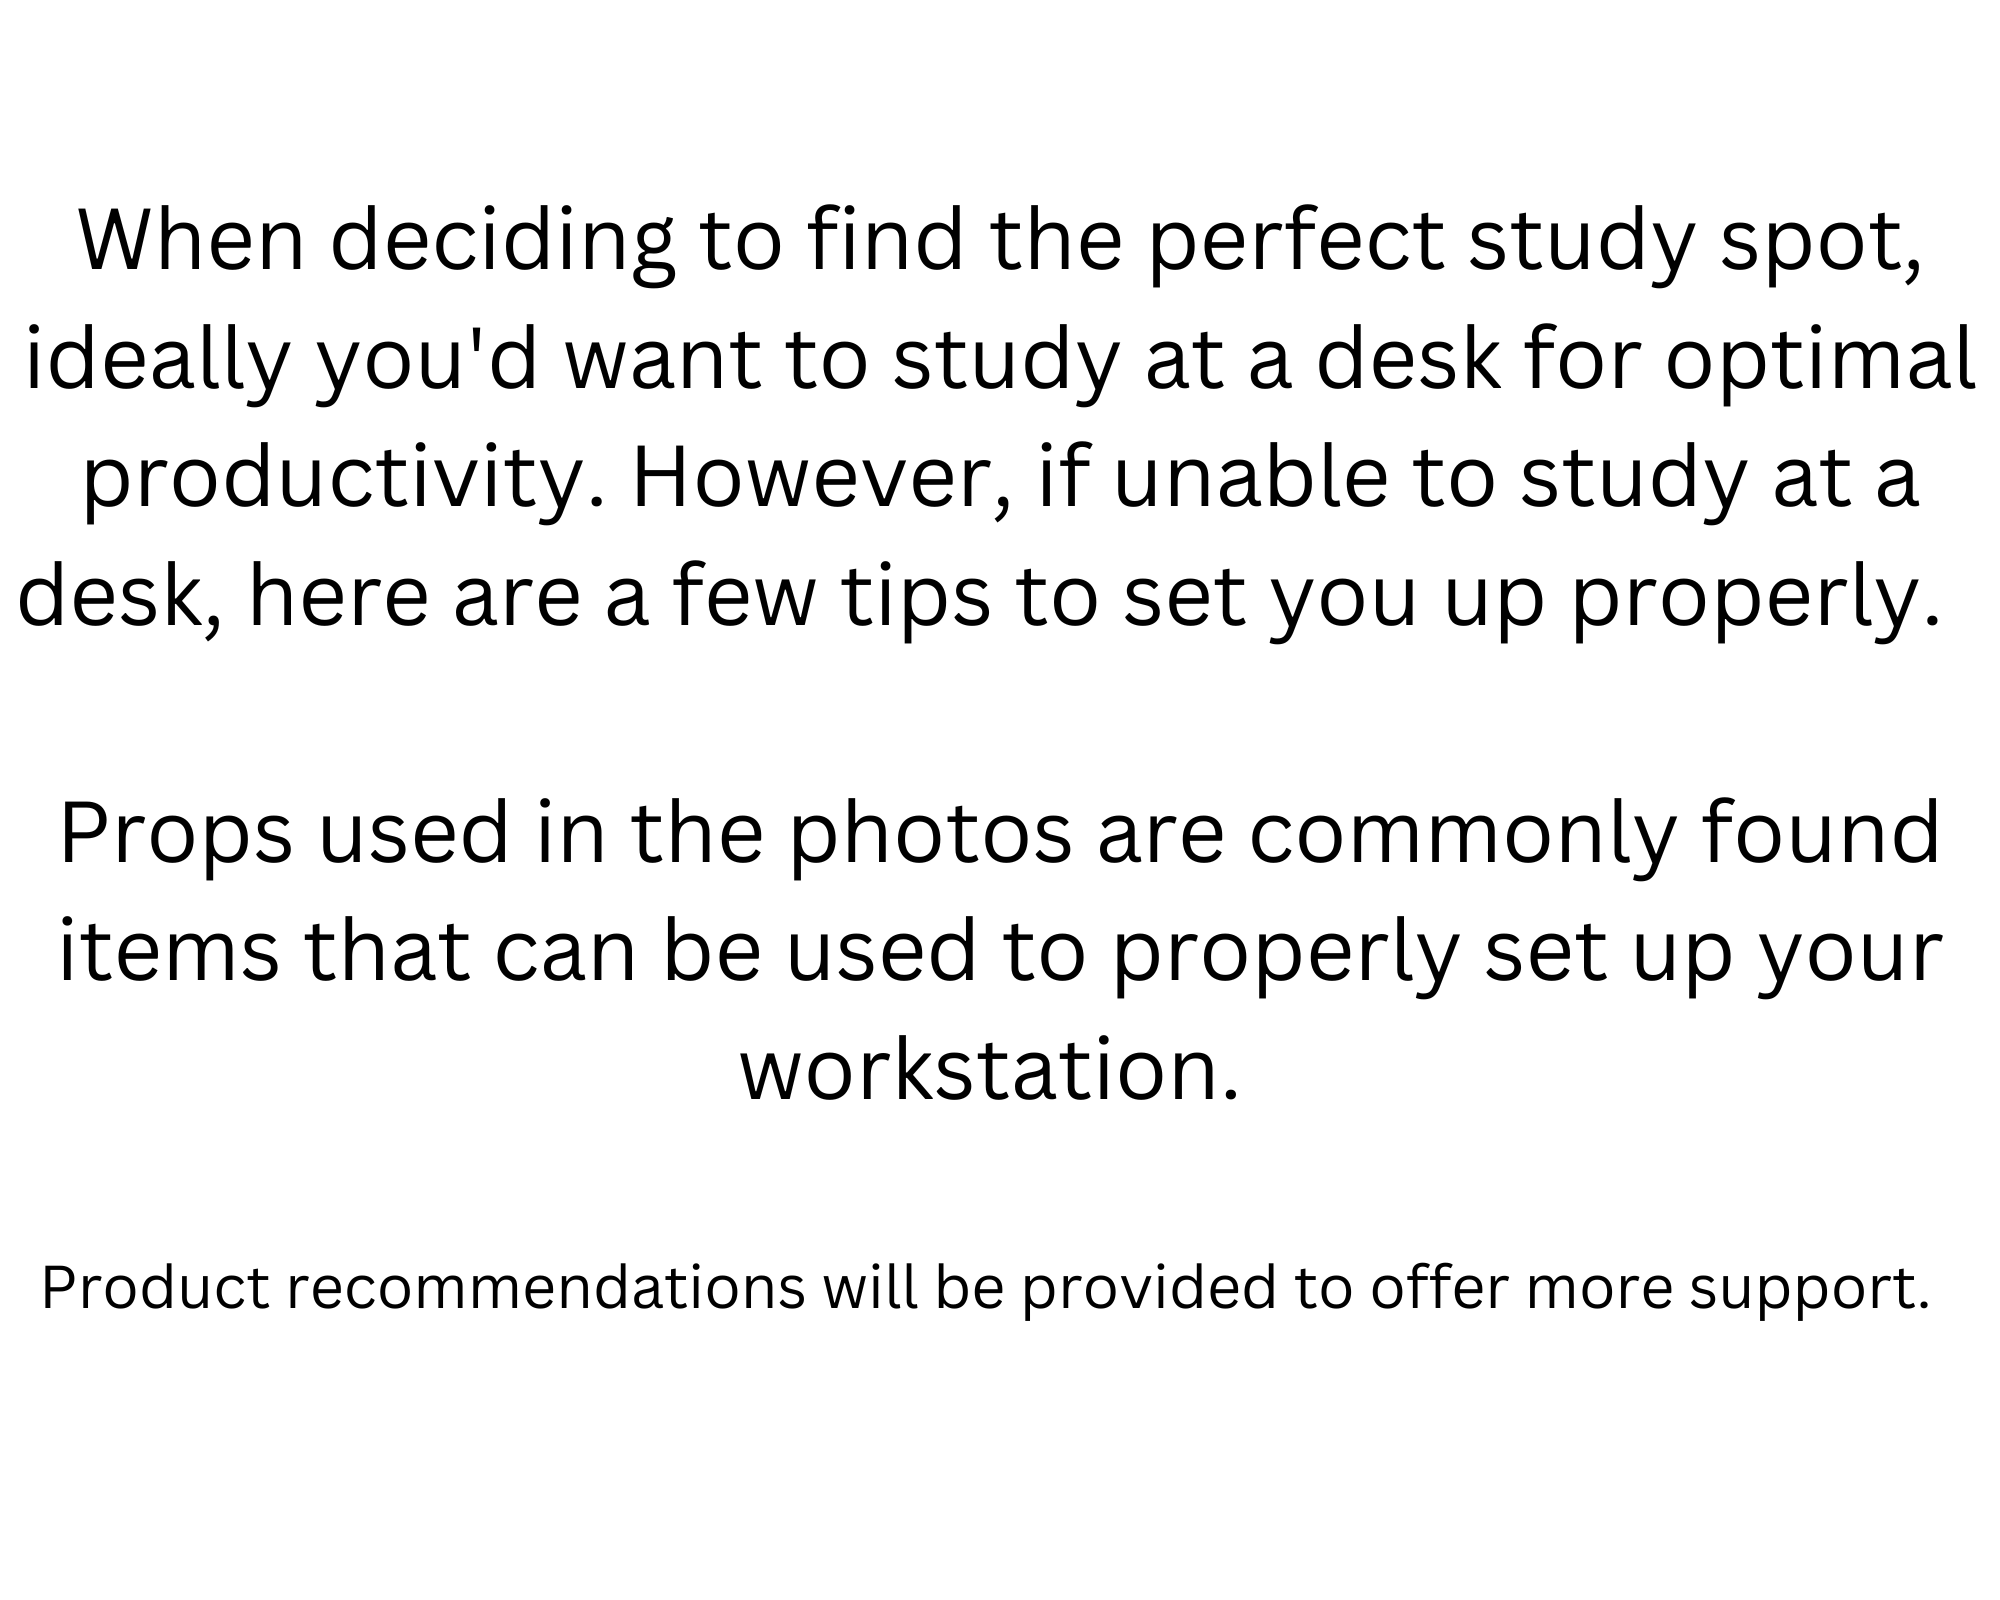 Black text on a white background: "When deciding to find the perfect study spot, ideally you